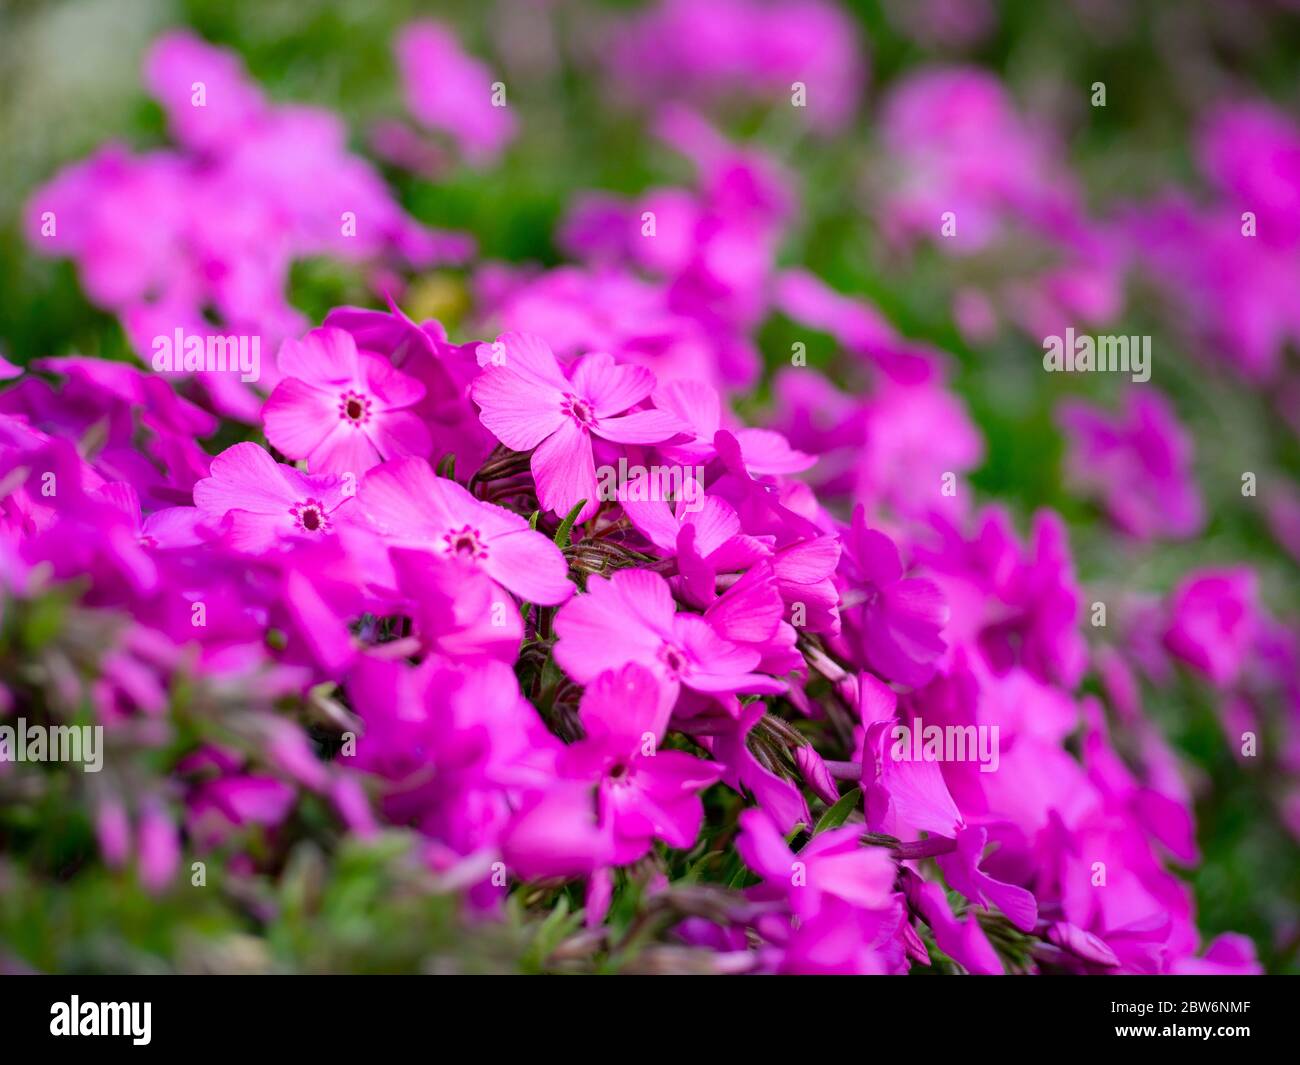 bunch of small purple flowers in outdoors Stock Photo